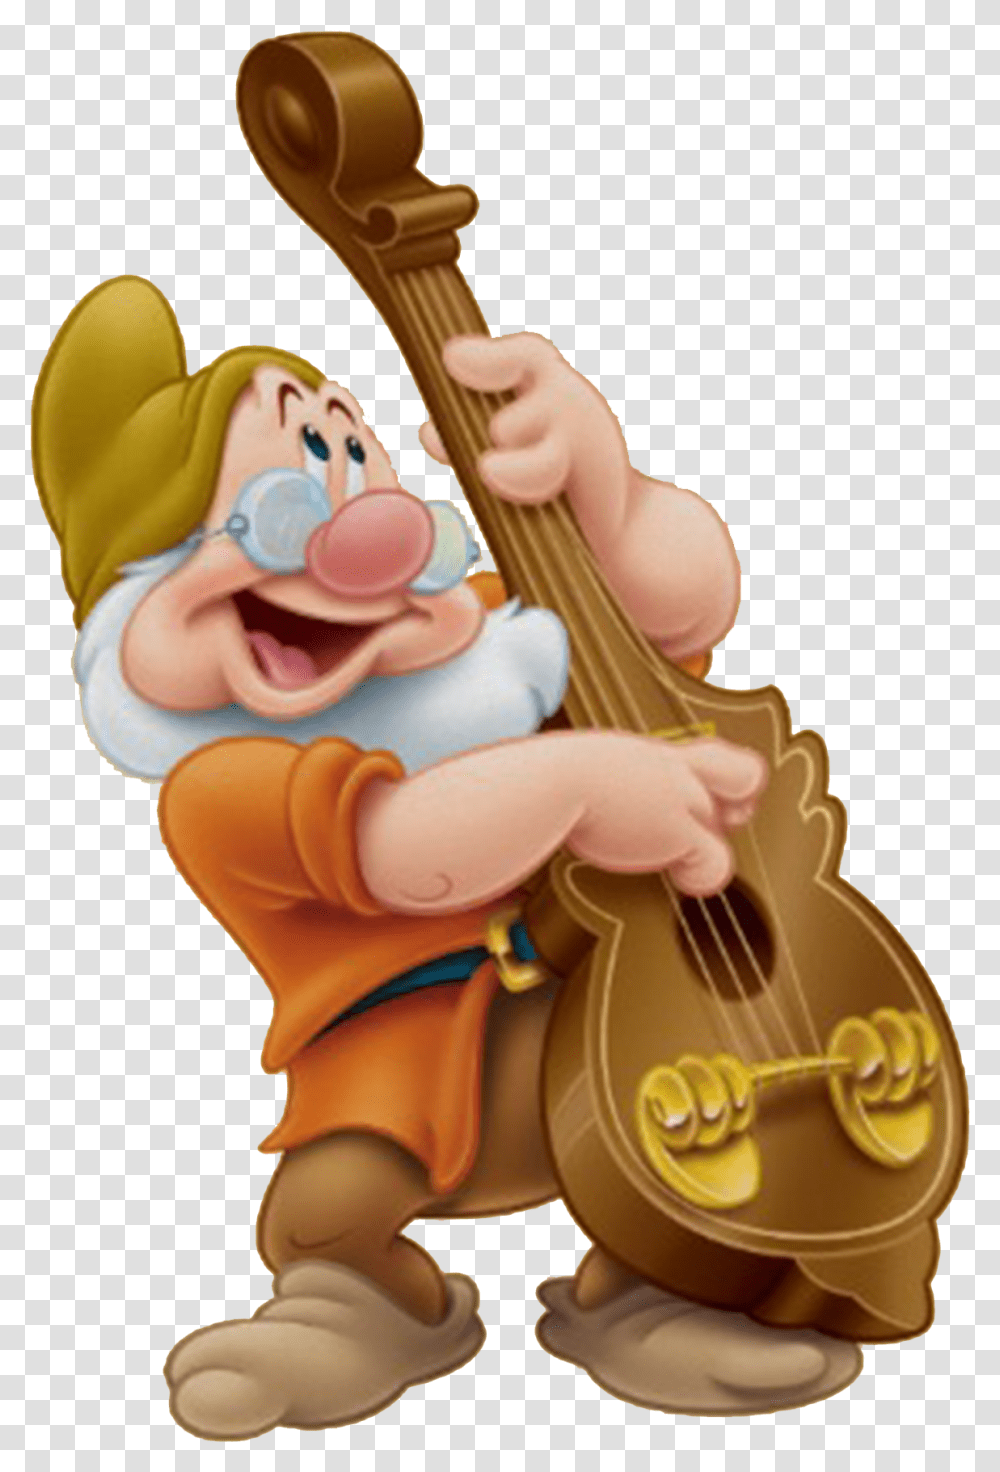 Download Disney Photo For Designing Projects Disney Characters, Musical Instrument, Leisure Activities, Figurine, Cello Transparent Png